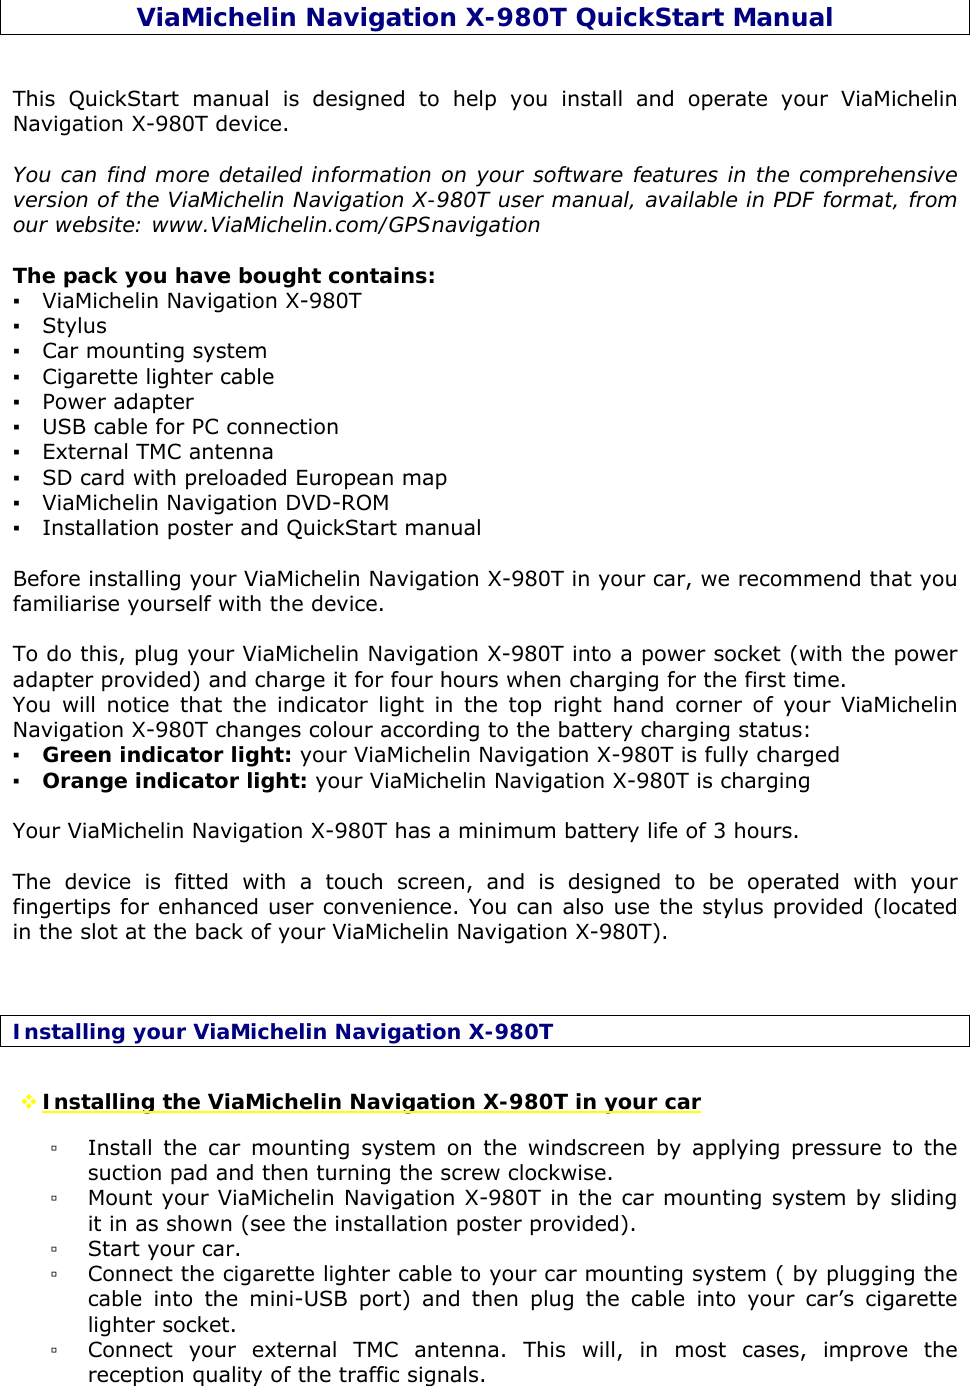 ViaMichelin Navigation X-980T QuickStart Manual   This QuickStart manual is designed to help you install and operate your ViaMichelin Navigation X-980T device.    You can find more detailed information on your software features in the comprehensive version of the ViaMichelin Navigation X-980T user manual, available in PDF format, from our website: www.ViaMichelin.com/GPSnavigation  The pack you have bought contains: ▪ ViaMichelin Navigation X-980T  ▪ Stylus ▪ Car mounting system ▪ Cigarette lighter cable ▪ Power adapter ▪ USB cable for PC connection ▪ External TMC antenna ▪ SD card with preloaded European map ▪ ViaMichelin Navigation DVD-ROM ▪ Installation poster and QuickStart manual  Before installing your ViaMichelin Navigation X-980T in your car, we recommend that you familiarise yourself with the device.  To do this, plug your ViaMichelin Navigation X-980T into a power socket (with the power adapter provided) and charge it for four hours when charging for the first time. You will notice that the indicator light in the top right hand corner of your ViaMichelin Navigation X-980T changes colour according to the battery charging status: ▪ Green indicator light: your ViaMichelin Navigation X-980T is fully charged ▪ Orange indicator light: your ViaMichelin Navigation X-980T is charging  Your ViaMichelin Navigation X-980T has a minimum battery life of 3 hours.  The device is fitted with a touch screen, and is designed to be operated with your fingertips for enhanced user convenience. You can also use the stylus provided (located in the slot at the back of your ViaMichelin Navigation X-980T).   Installing your ViaMichelin Navigation X-980T  Installing the ViaMichelin Navigation X-980T in your car ▫ Install the car mounting system on the windscreen by applying pressure to the suction pad and then turning the screw clockwise. ▫ Mount your ViaMichelin Navigation X-980T in the car mounting system by sliding it in as shown (see the installation poster provided). ▫ Start your car. ▫ Connect the cigarette lighter cable to your car mounting system ( by plugging the cable into the mini-USB port) and then plug the cable into your car’s cigarette lighter socket. ▫ Connect your external TMC antenna. This will, in most cases, improve the reception quality of the traffic signals.     